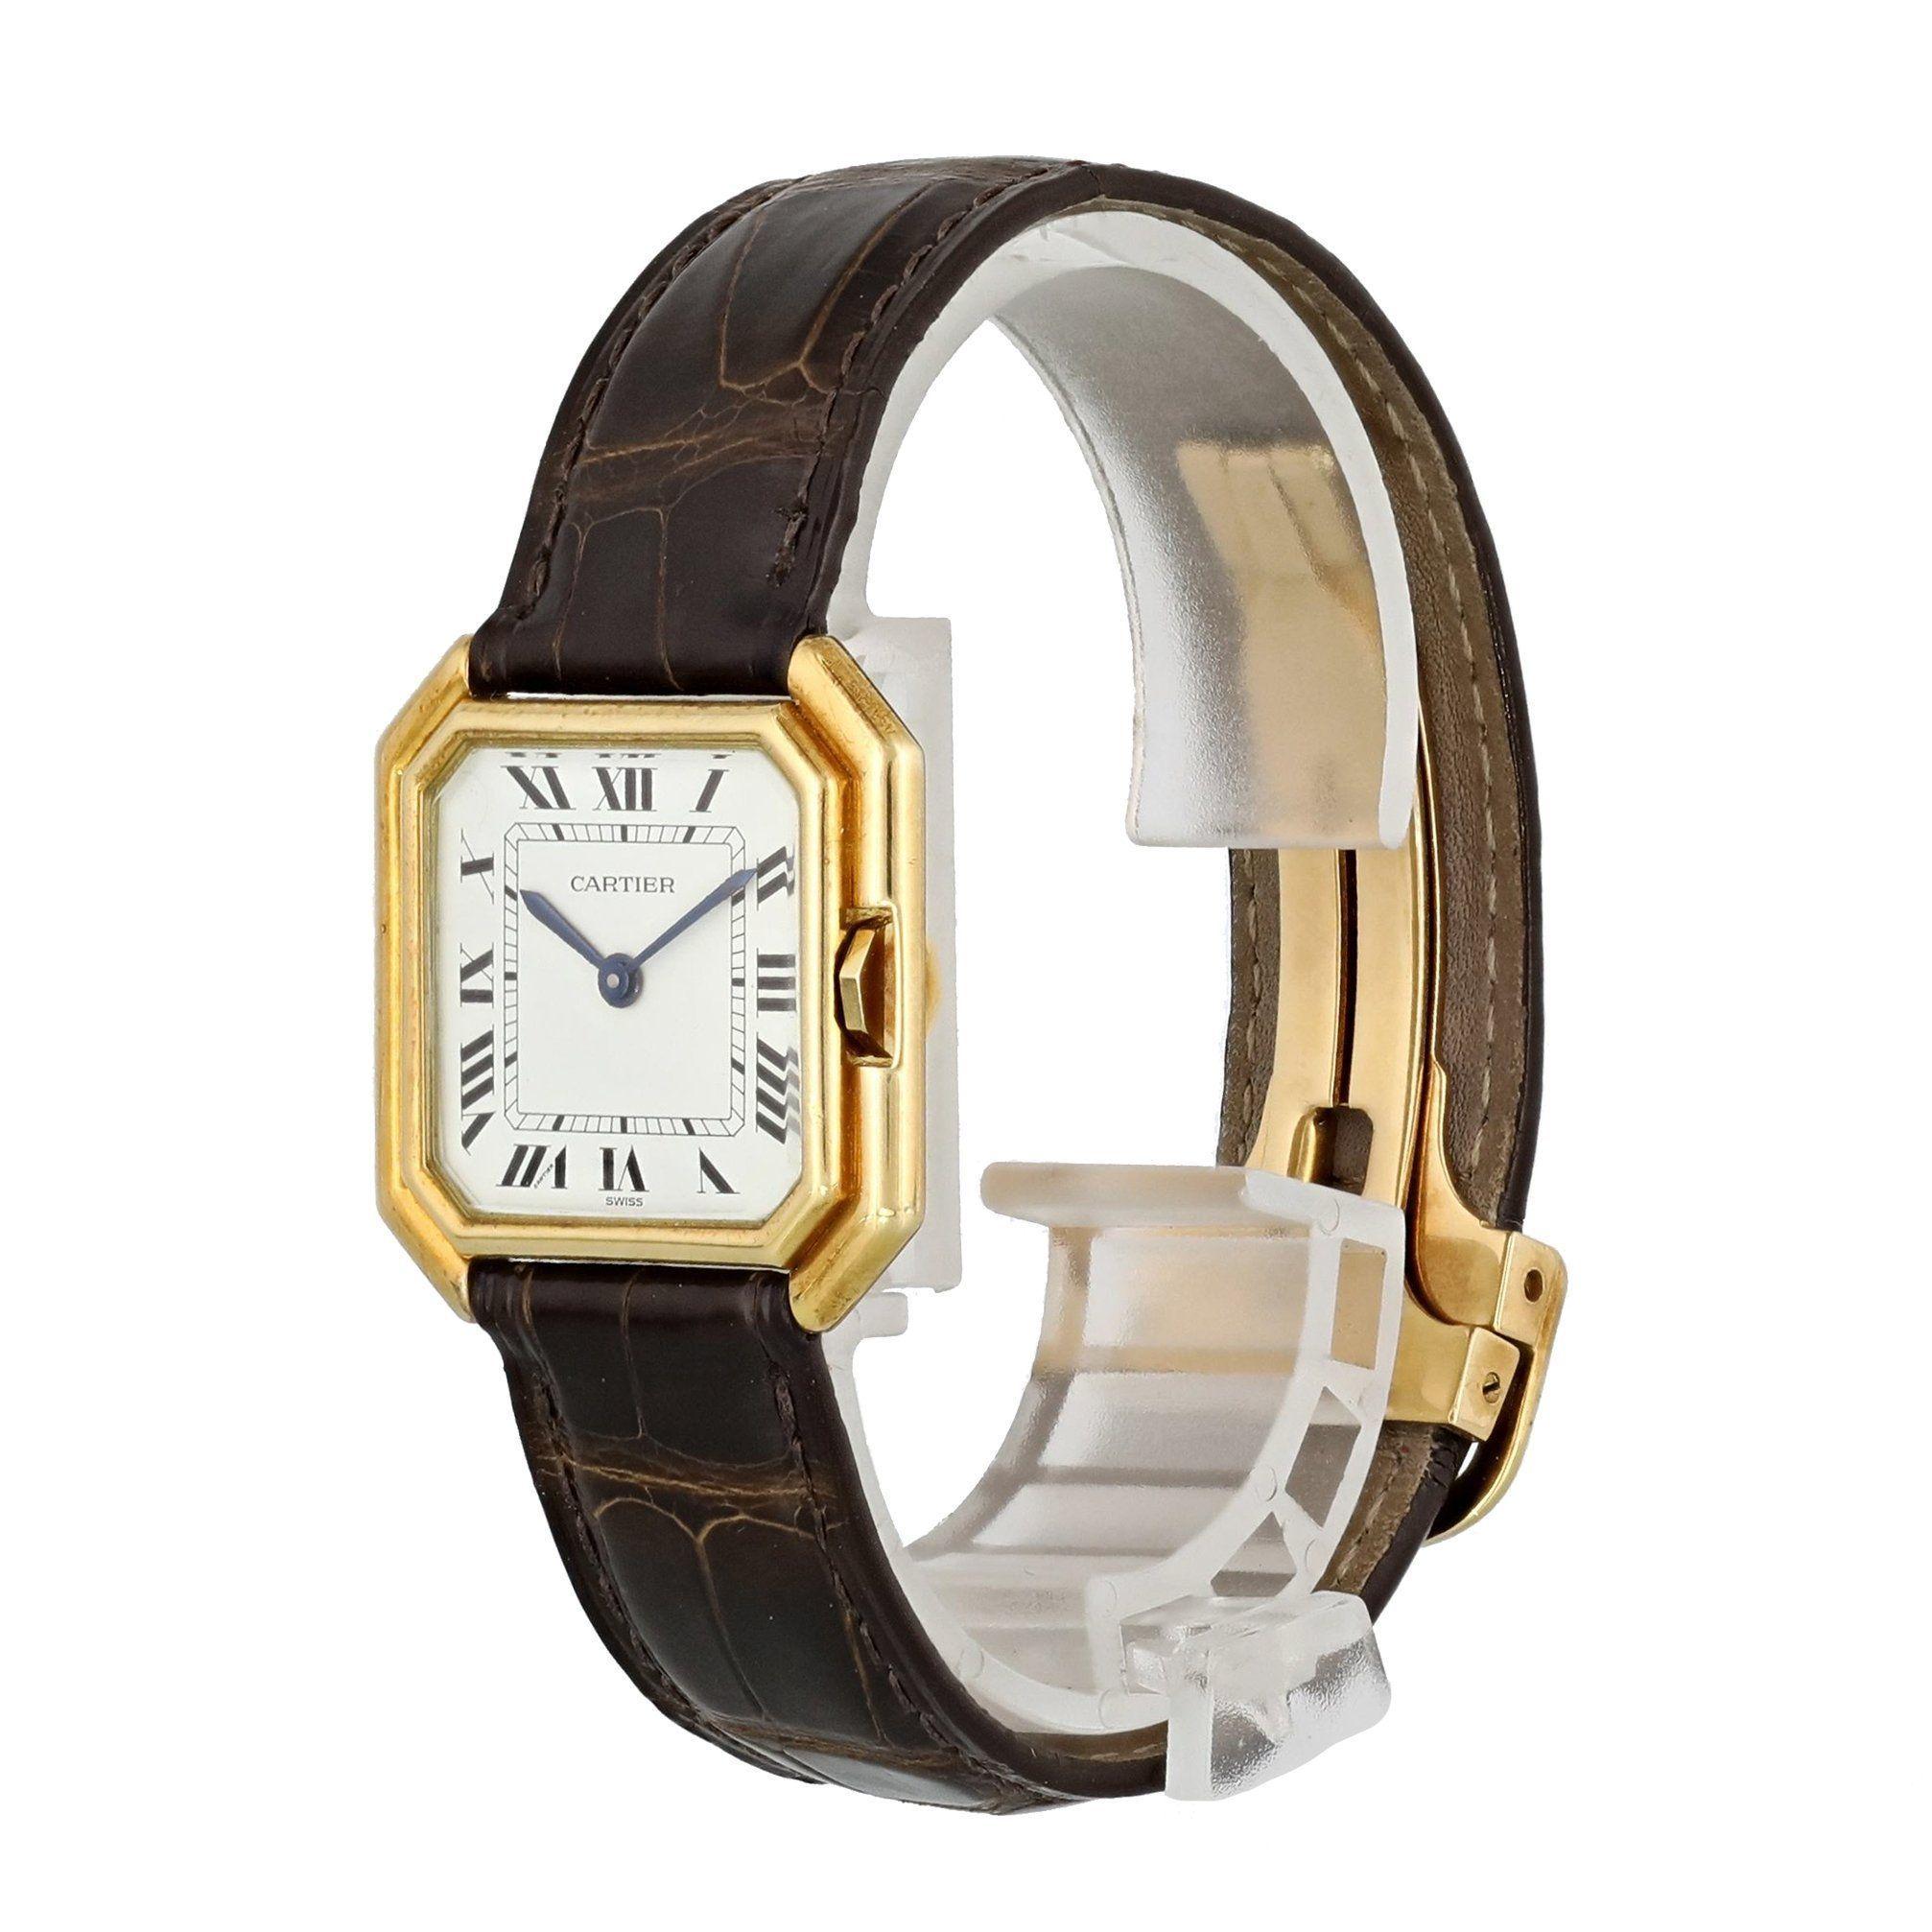 Cartier Paris 18k Yellow Gold Vintage Ladies Watch.
31mm 18k Yellow Gold case. 
Yellow Gold Stationary bezel. 
Off-White dial with  Blue steel hands and Roman numeral hour markers. 
Minute markers on the inner dial. 
Leather Alligator Strap with